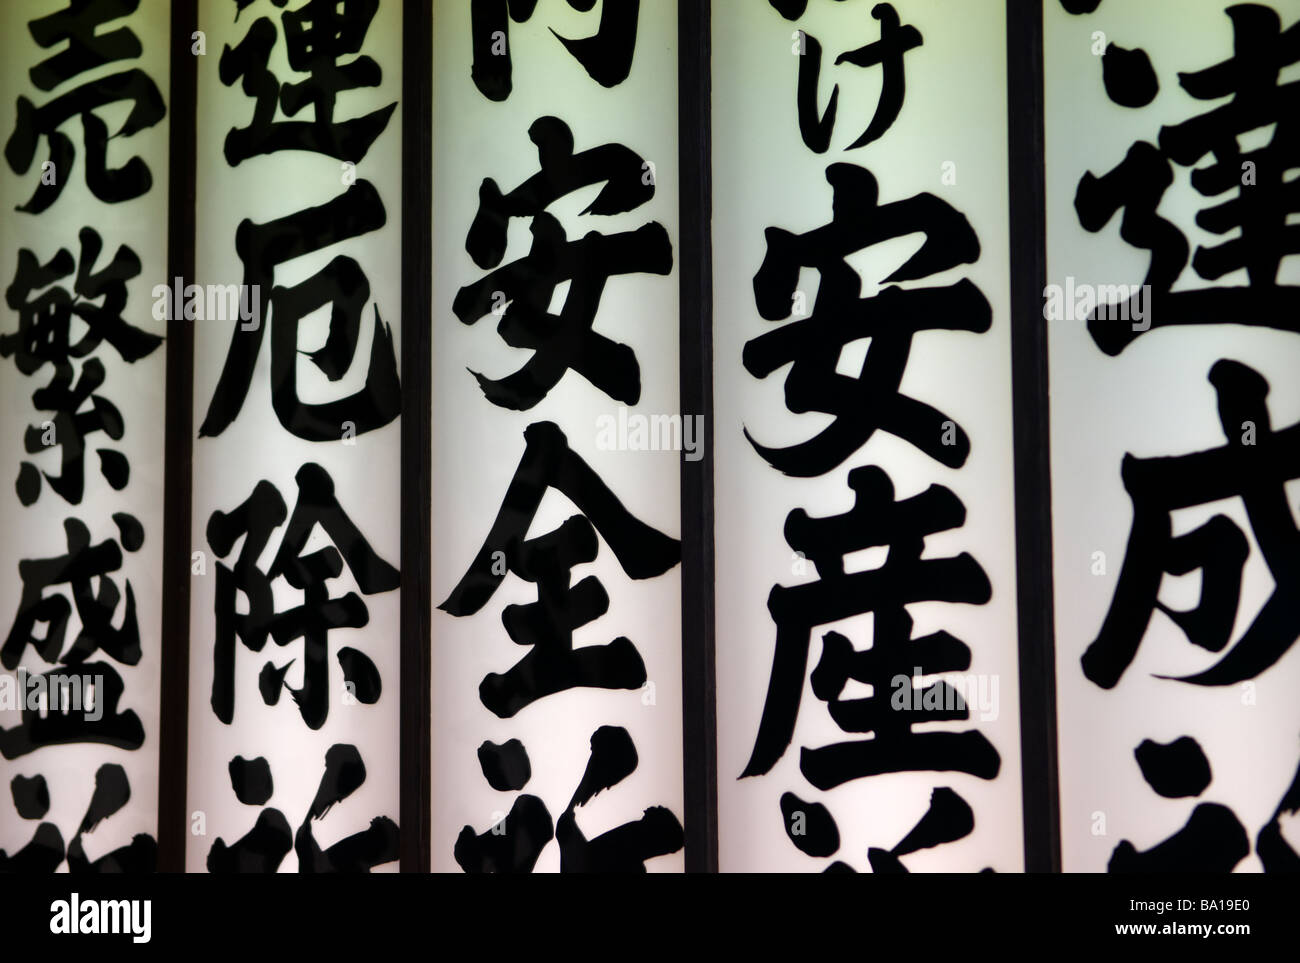 Japanese writing on a sign in Tokyo, Japan Stock Photo - Alamy